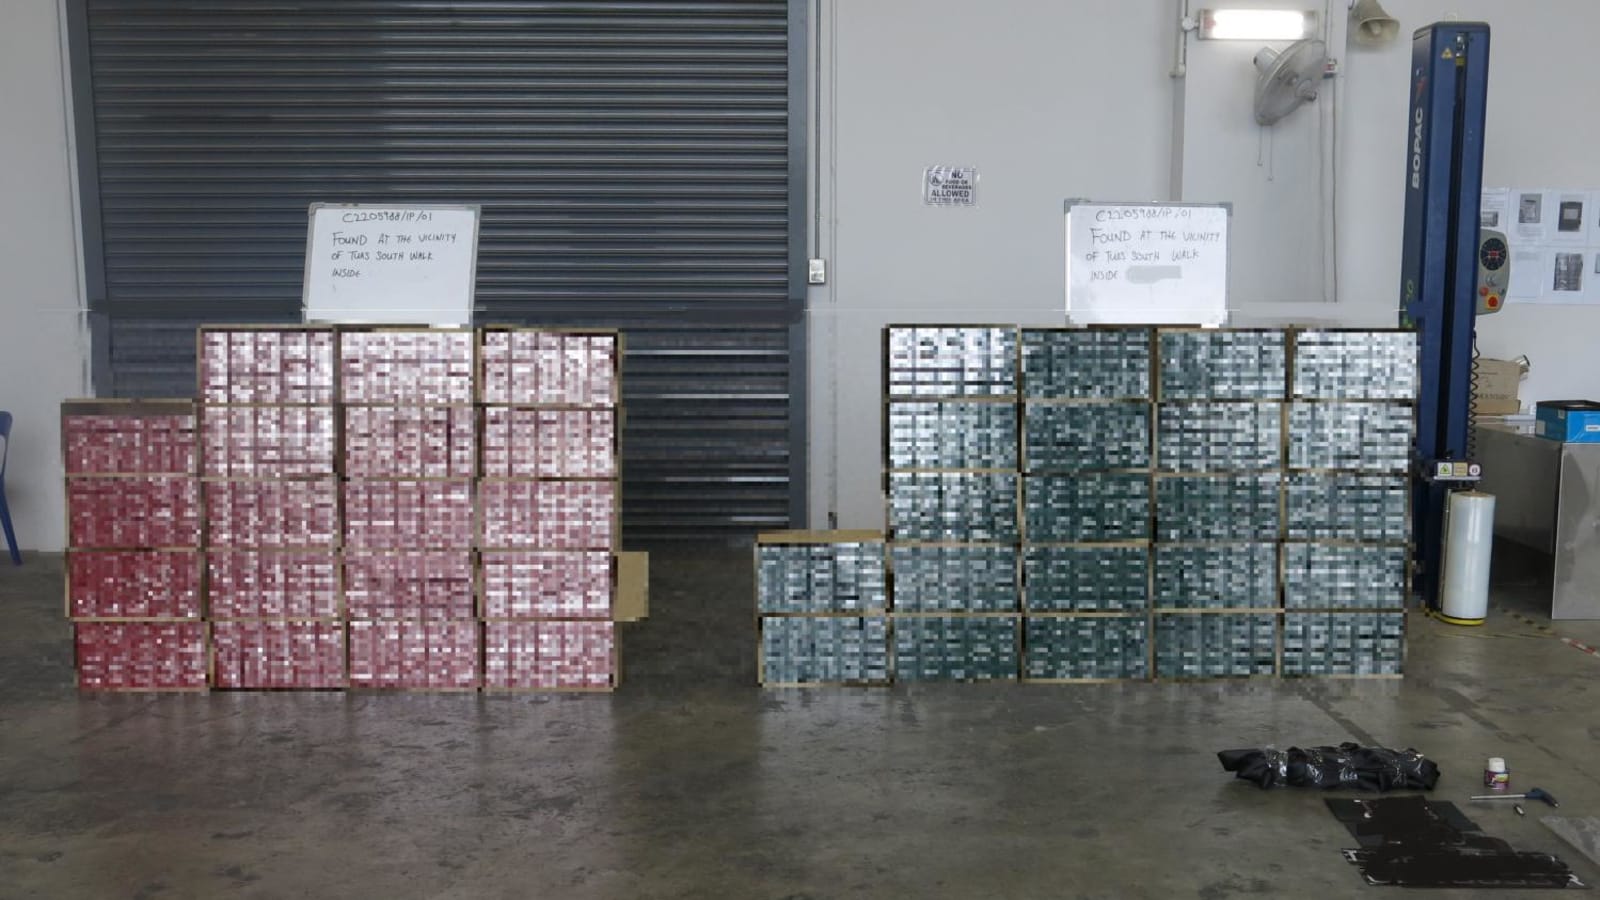 More than 1,000 cartons of duty-unpaid cigarettes seized in Tuas